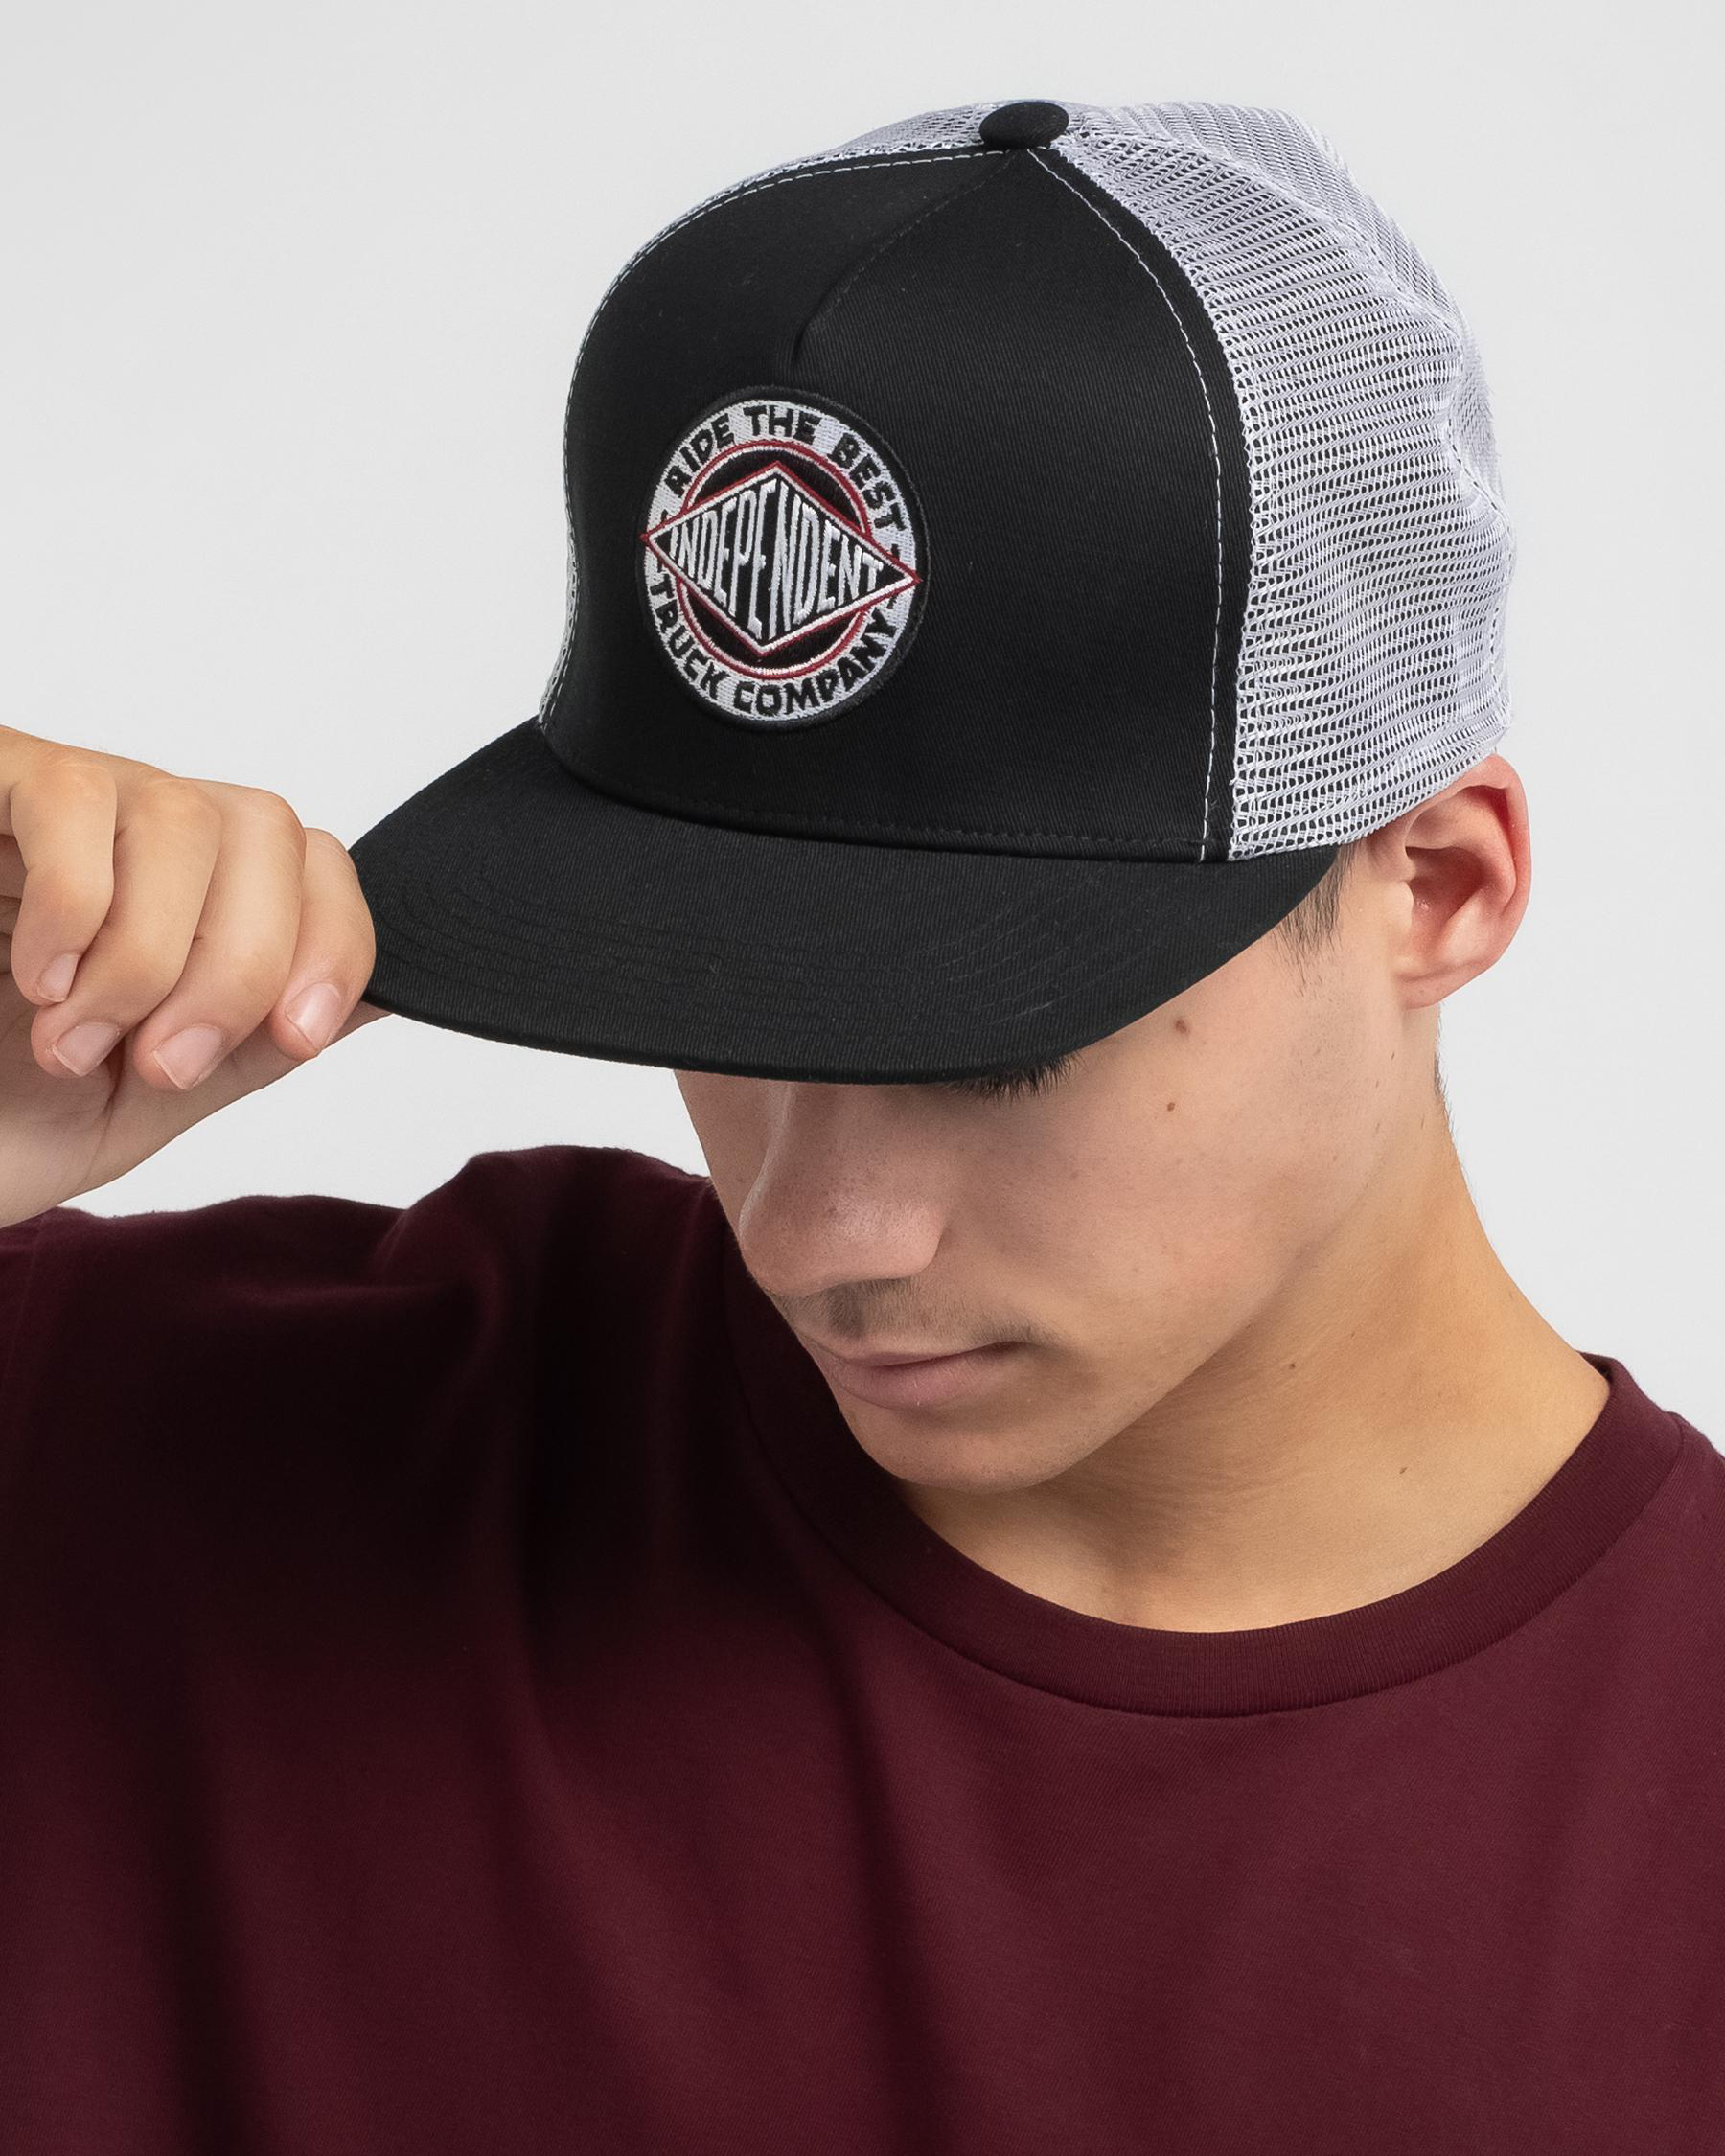 Independent BTG Summit Snap Back Trucker Cap In Black - FREE* Shipping ...